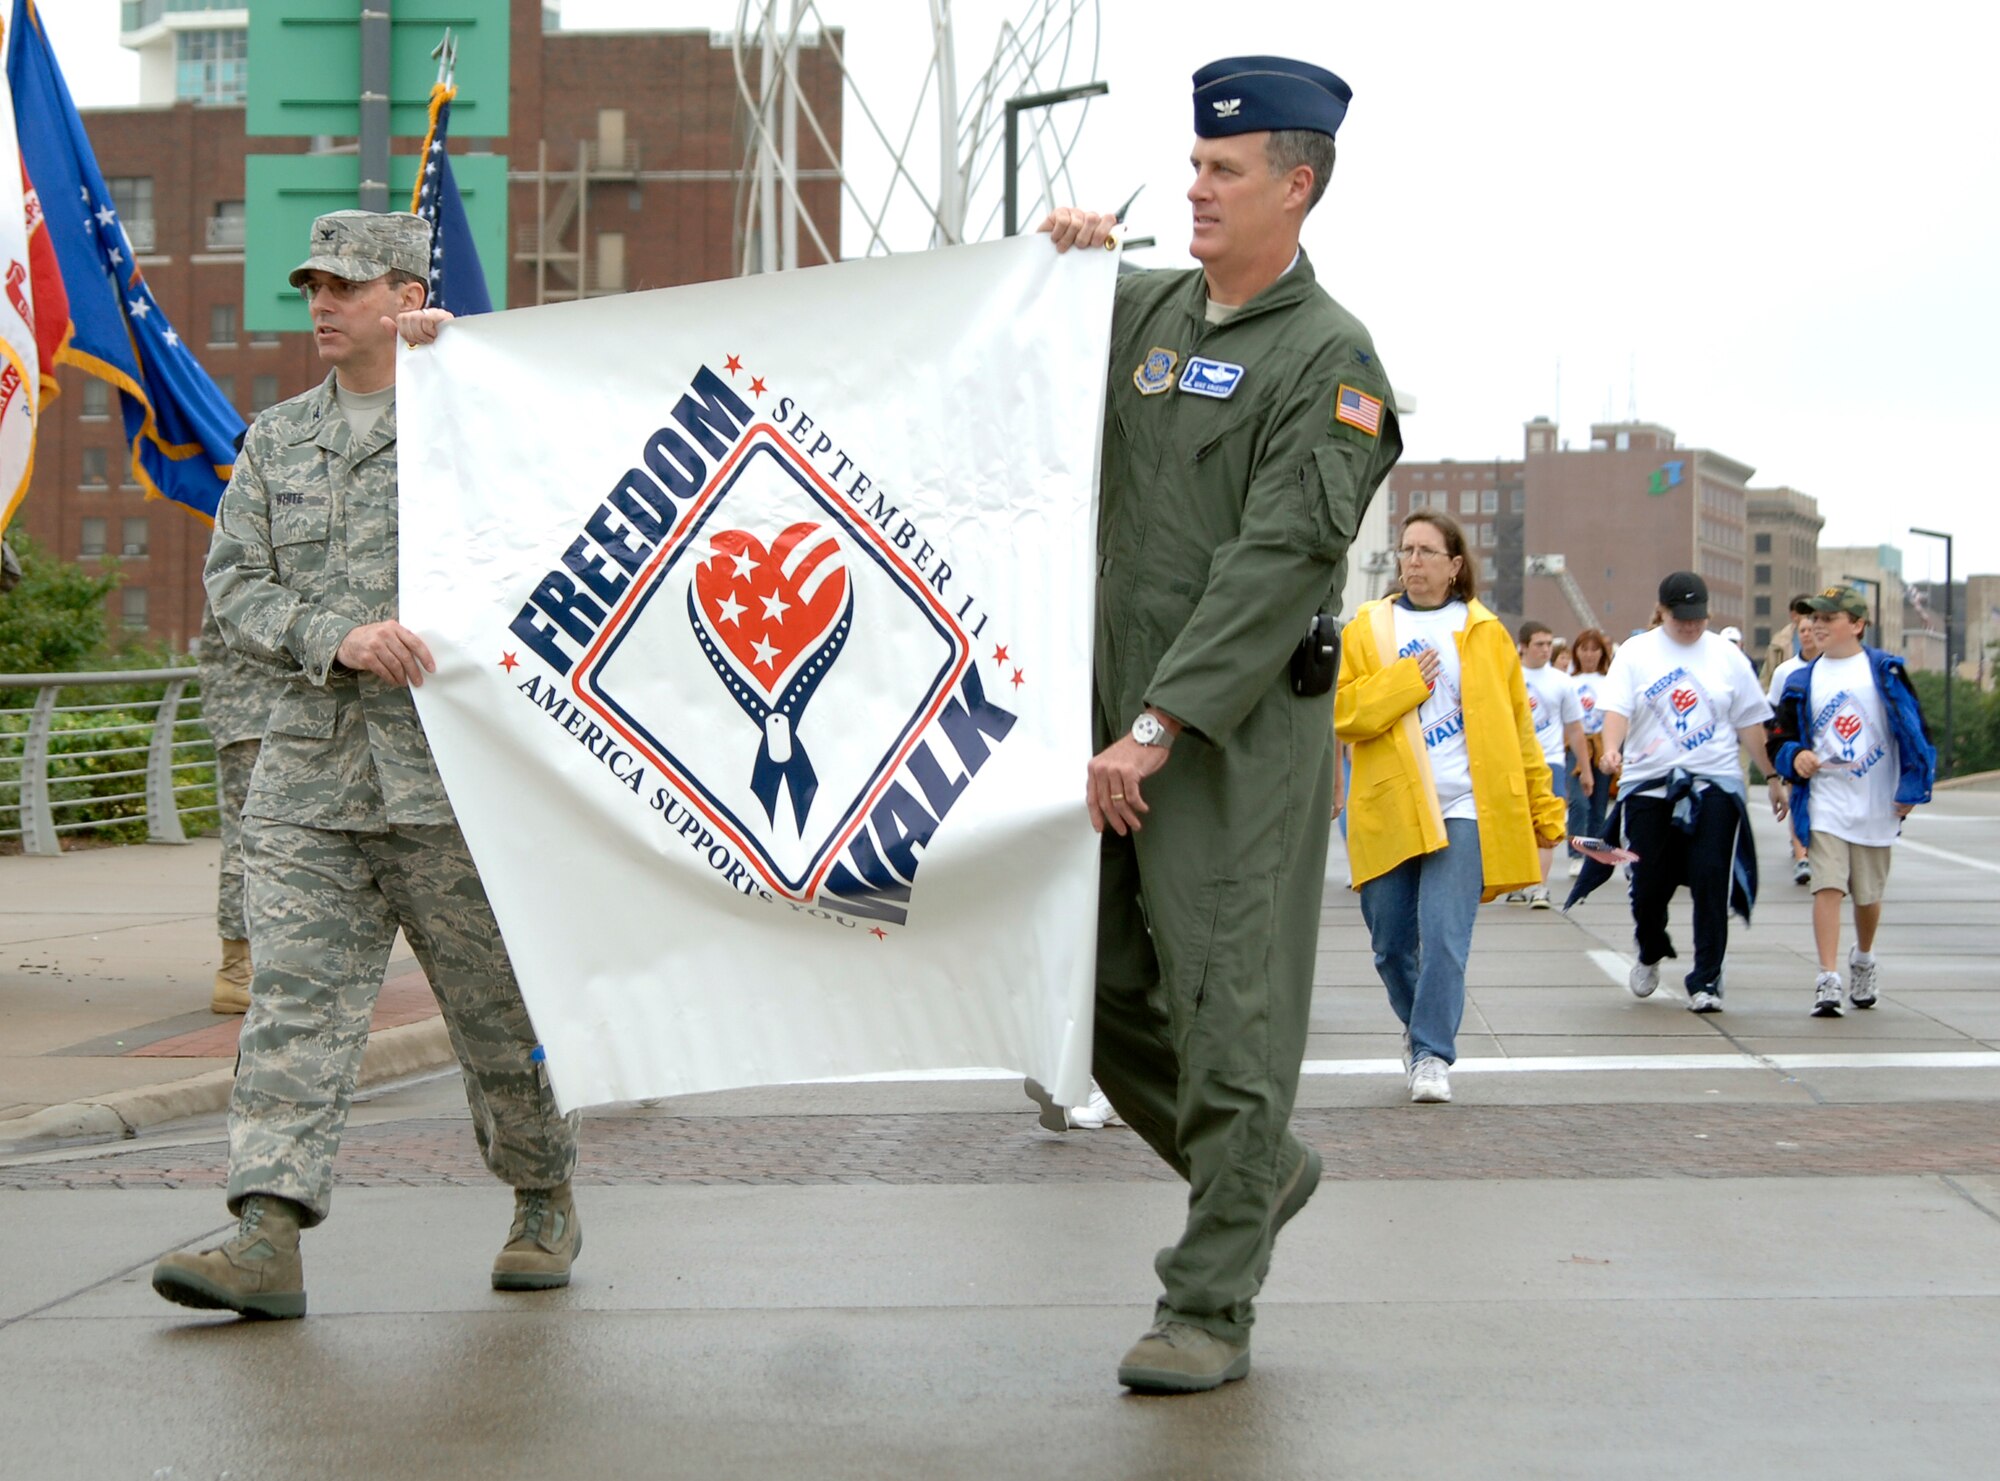 MCCONNELL AIR FORCE BASE, Kan. -- Col. Mark White, 22nd Mission Support Group commander, and Col. Michael Krueger, 22nd Air Refueling Wing vice commander, carry the first Wichita “America Supports You” Freedom Walk banner in downtown Wichita, Sept. 13.  This event is a time for people to reflect on the lives lost during the 9/11 attacks. (Photo by Staff Sgt. Ronald Lafosse)